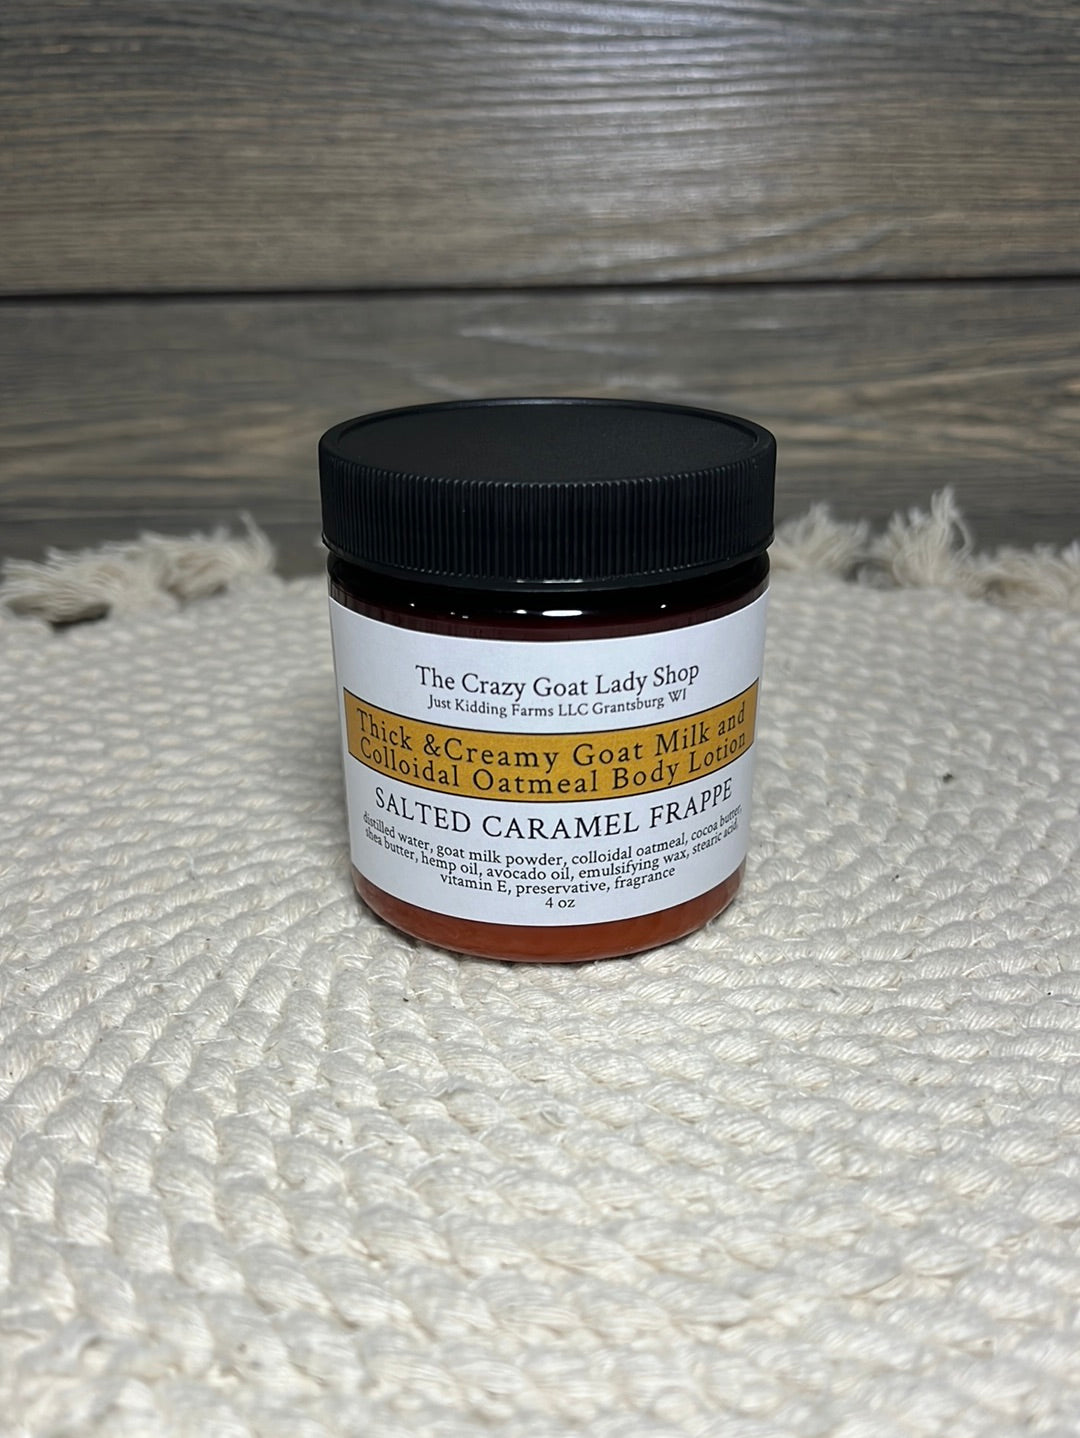 SALE**Thick & Creamy Goat Milk and Colloidal Oatmeal Body Lotion ~ Salted Caramel Frappe